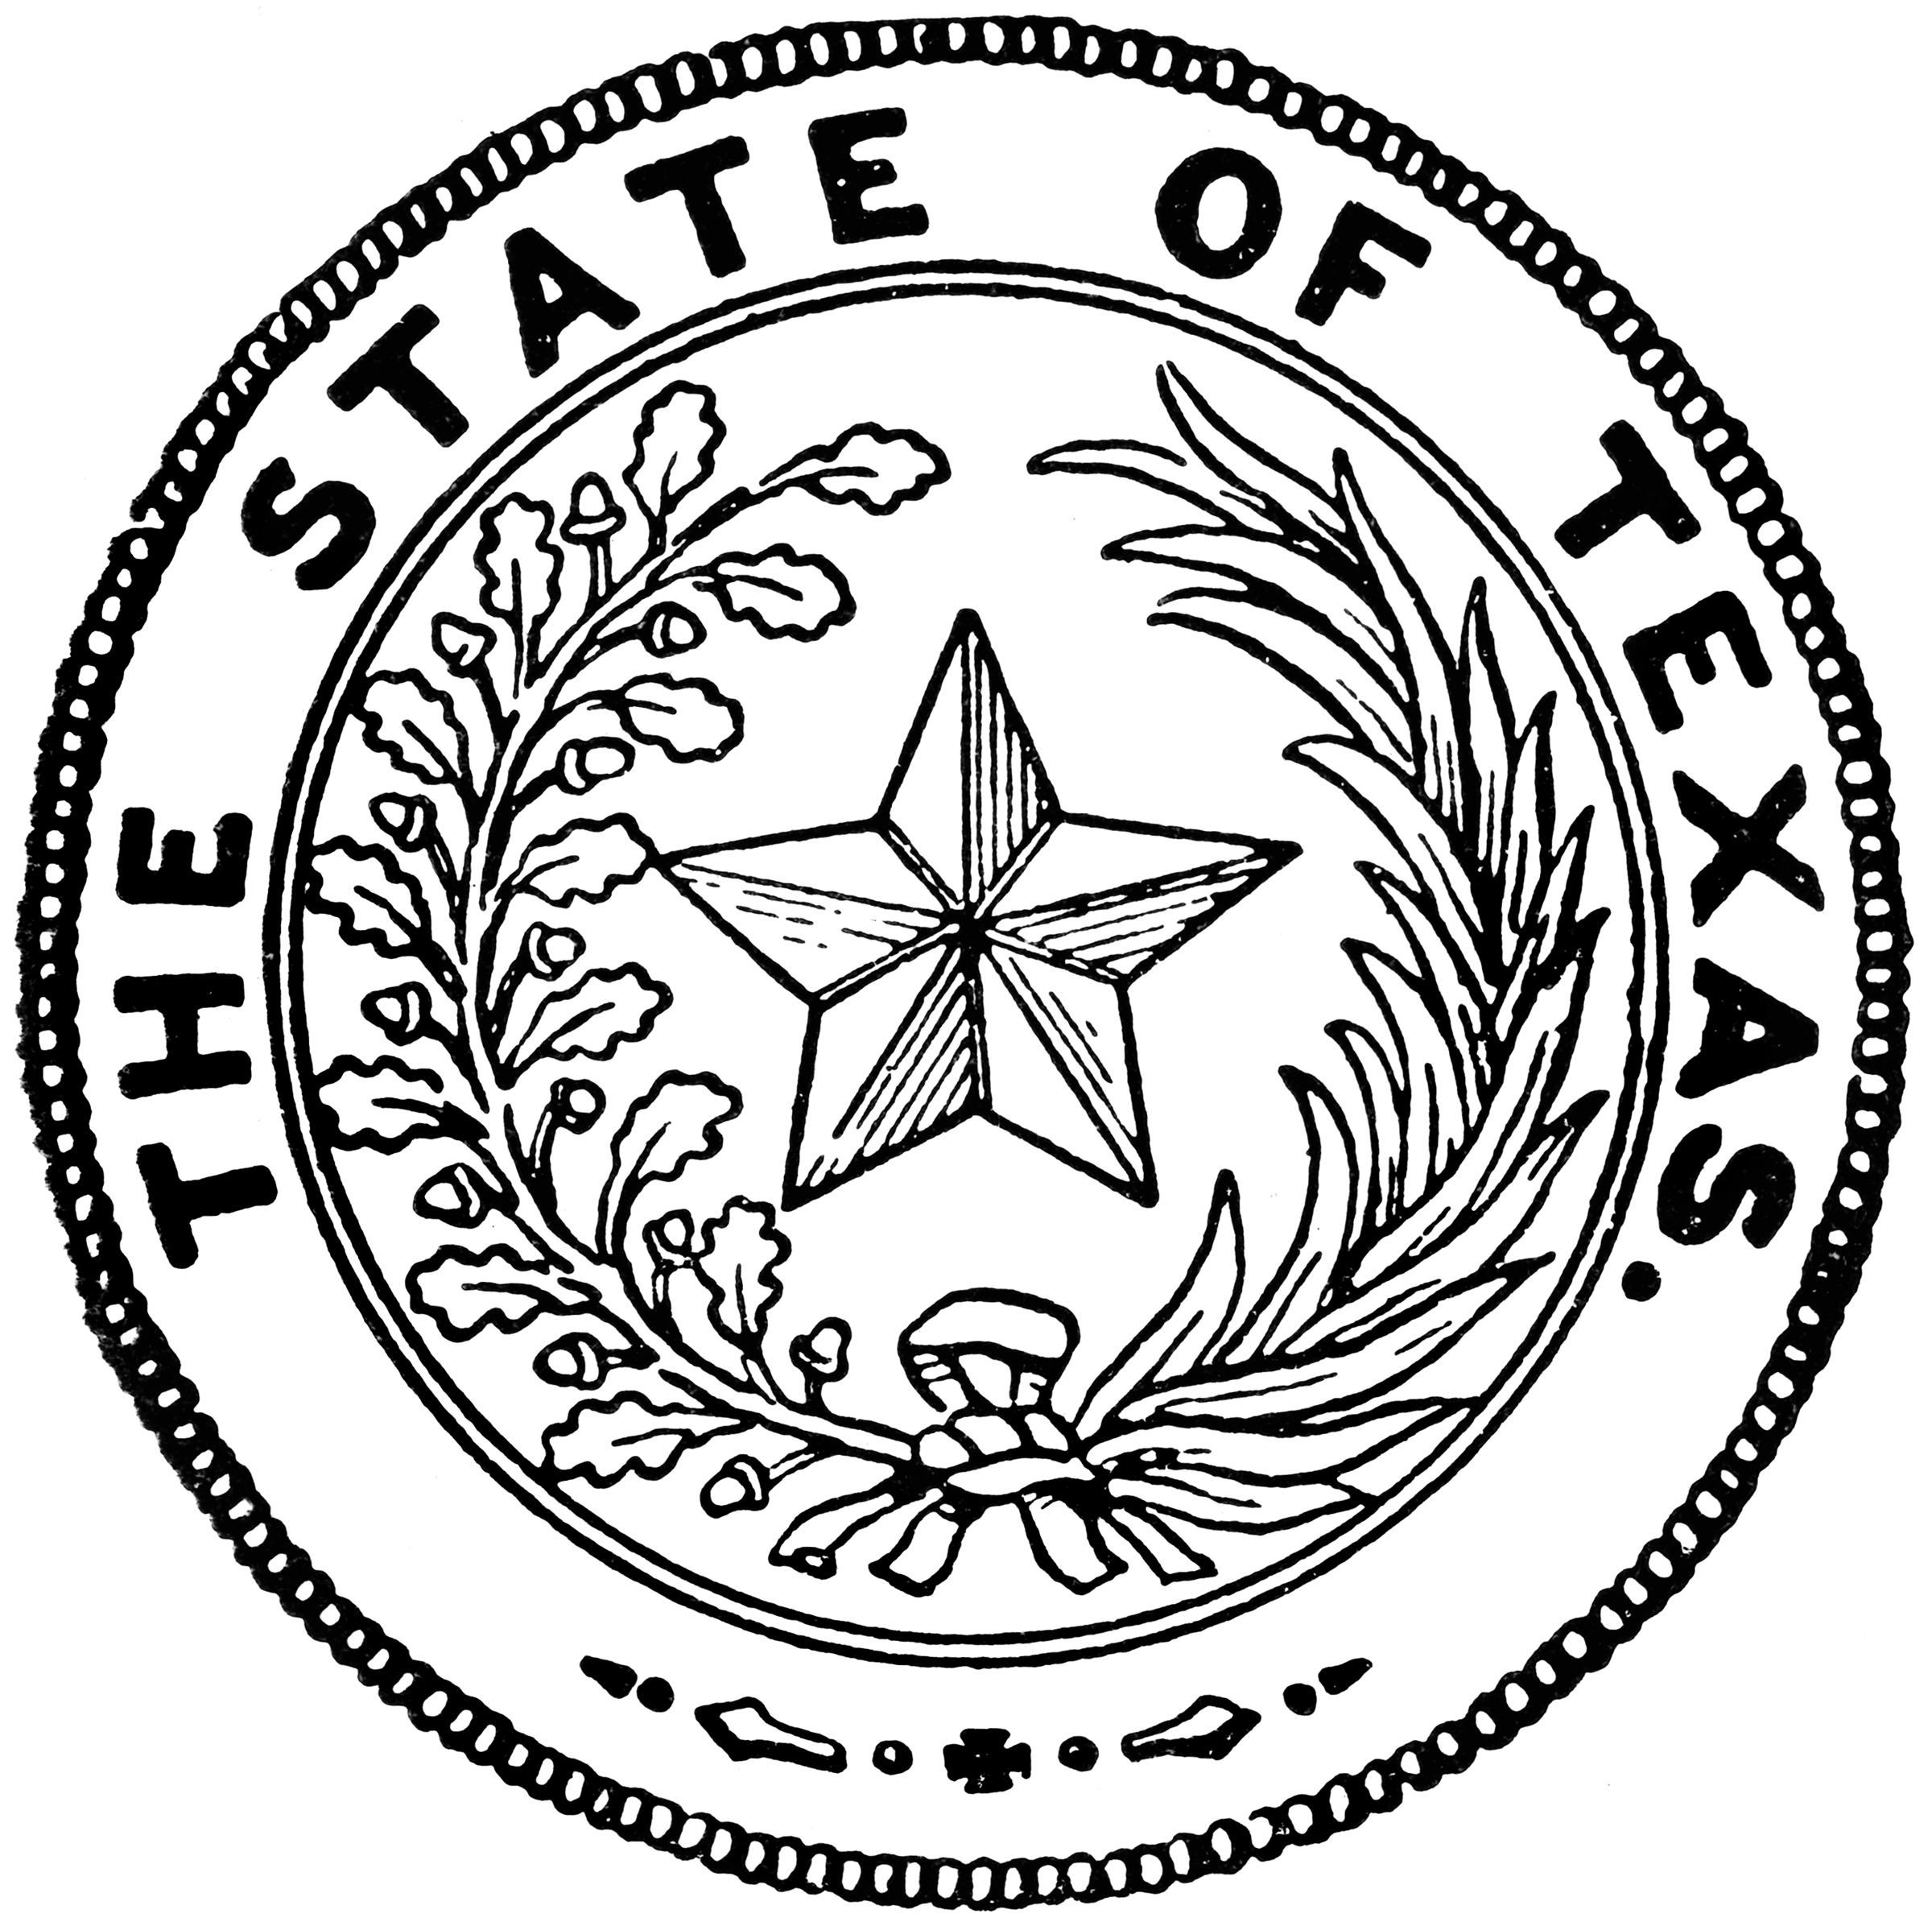 Seal of Texas ClipArt ETC